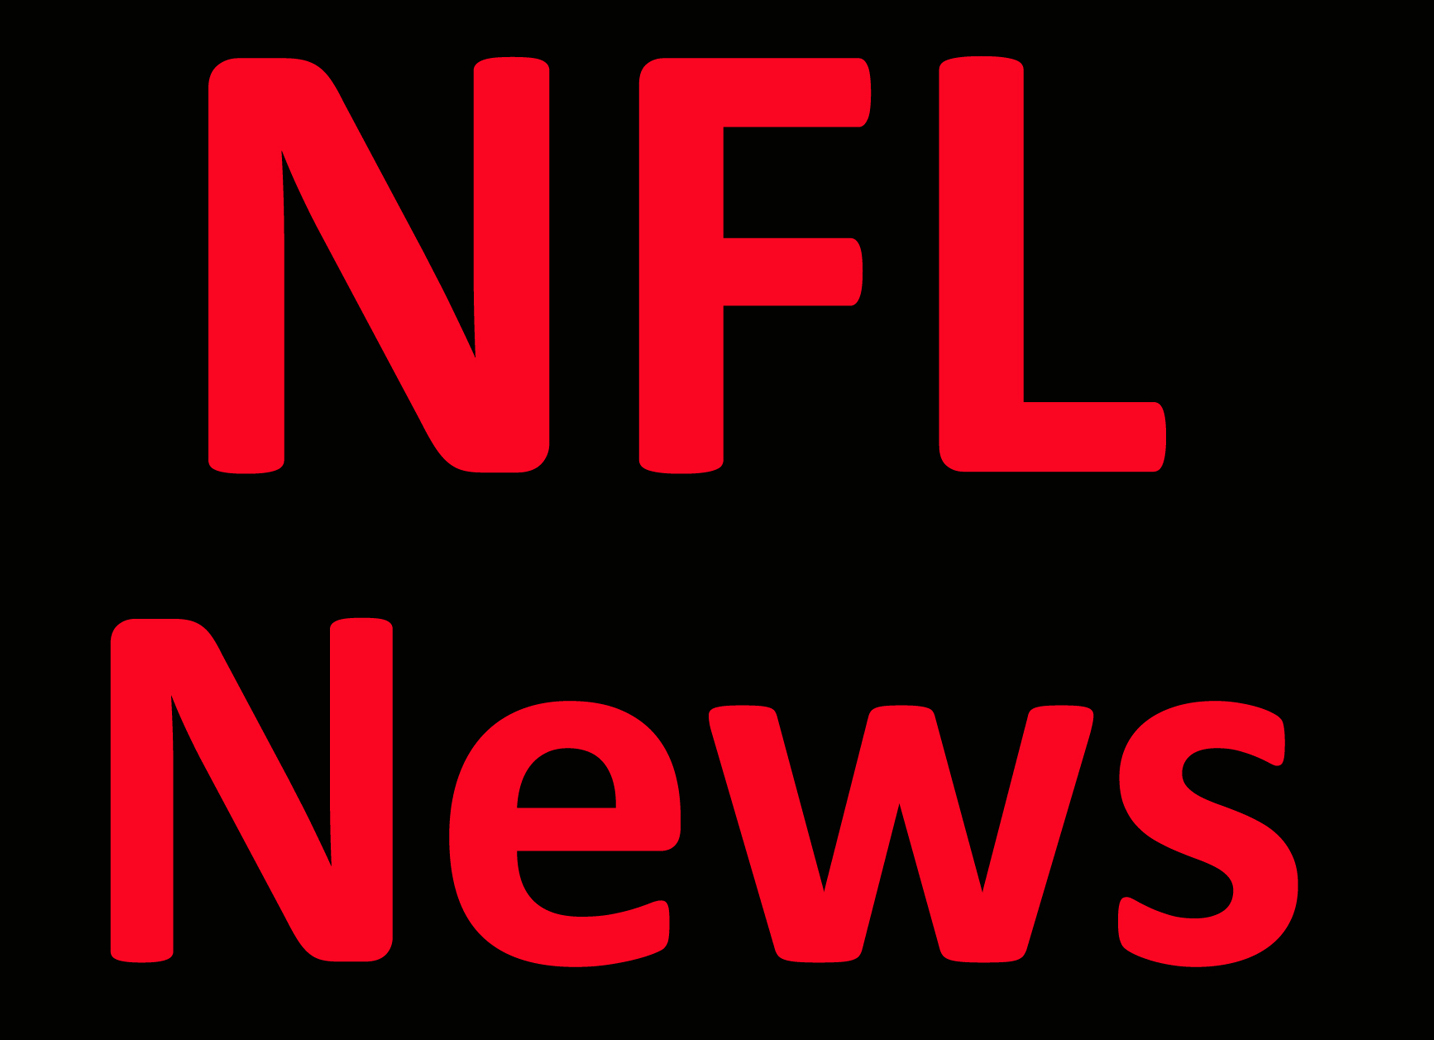 NFL News: The head-fake game: How sharp bettors fool the betting market Per Report